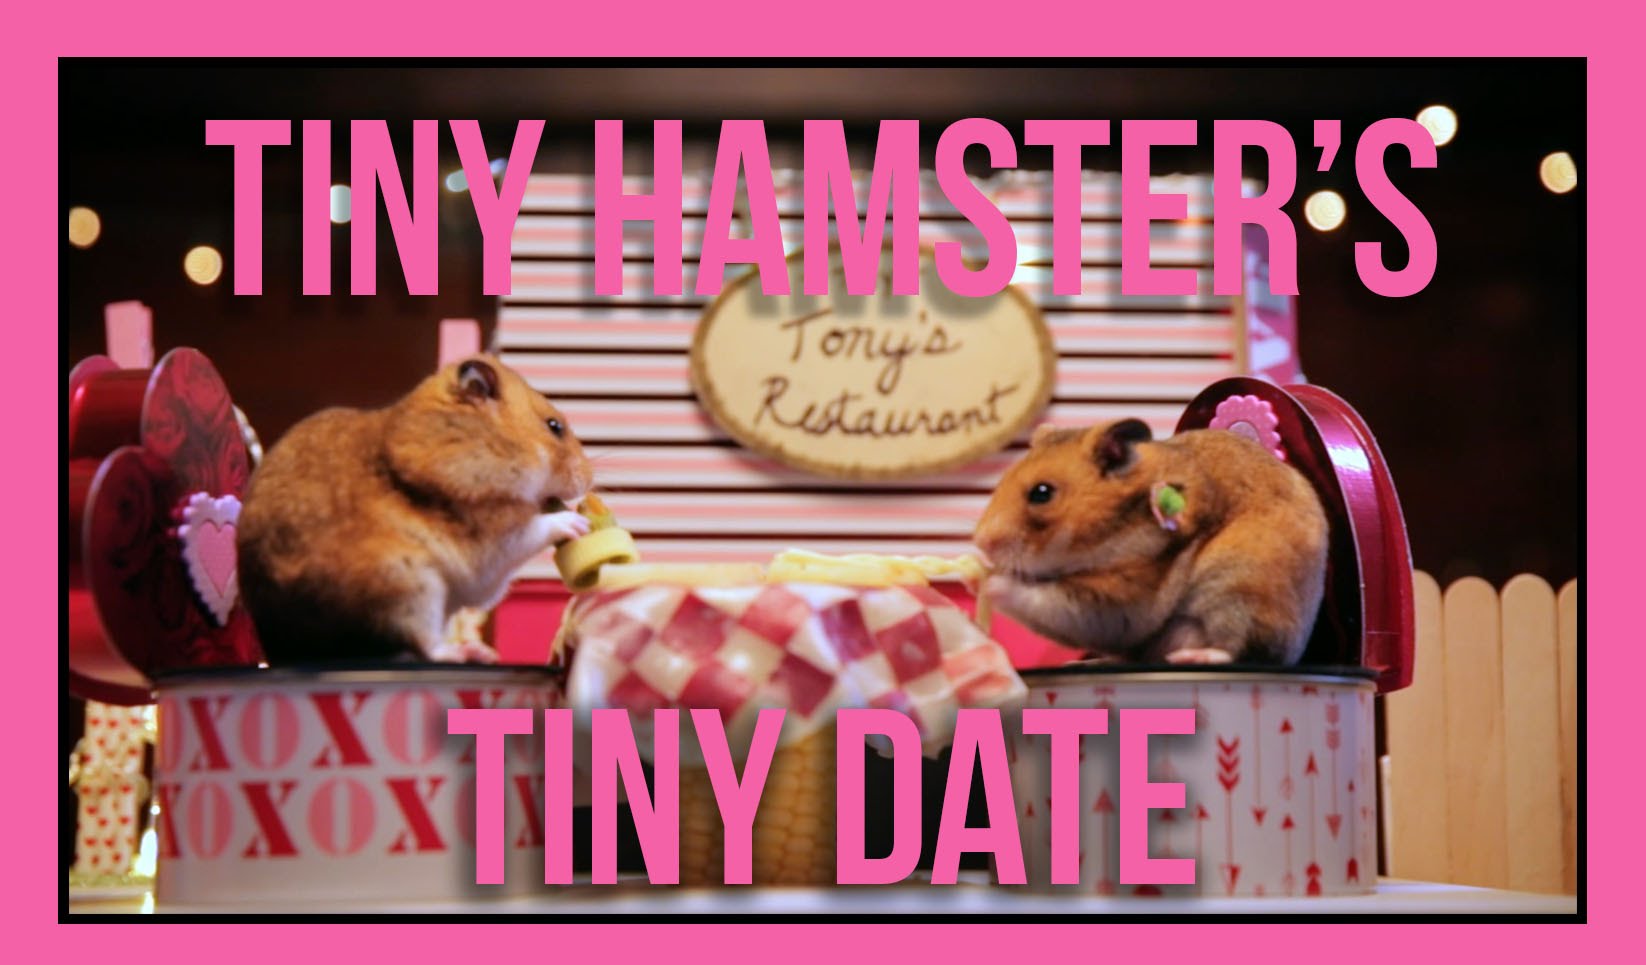 hamsters on date